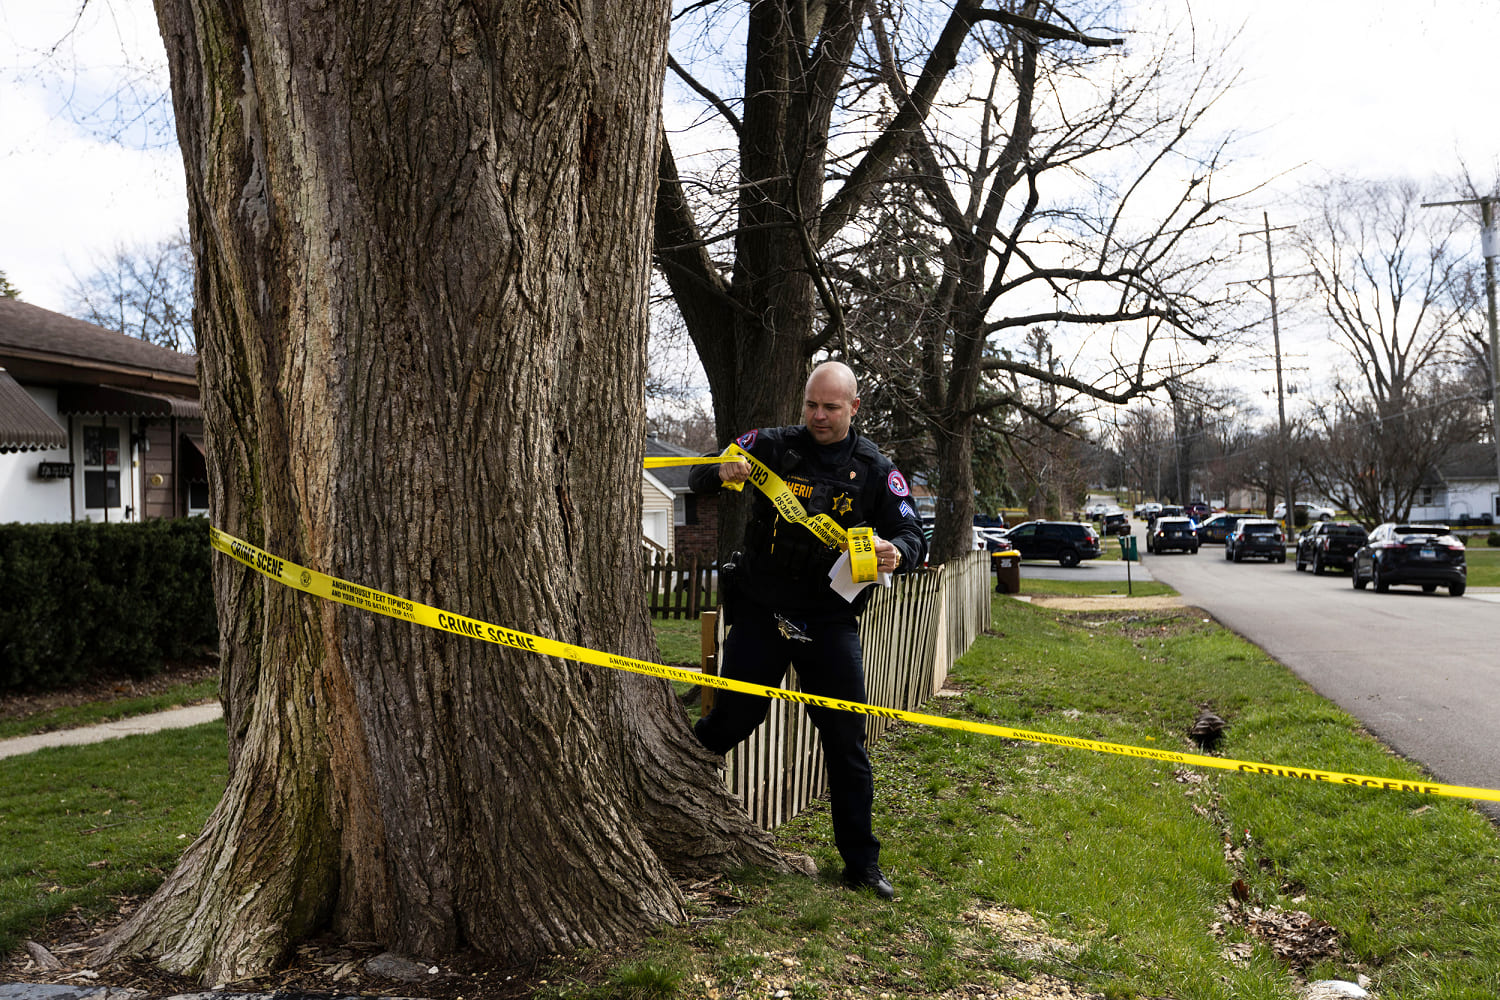 4 dead, including 15-year-old who died protecting her sister, in Illinois stabbing spree